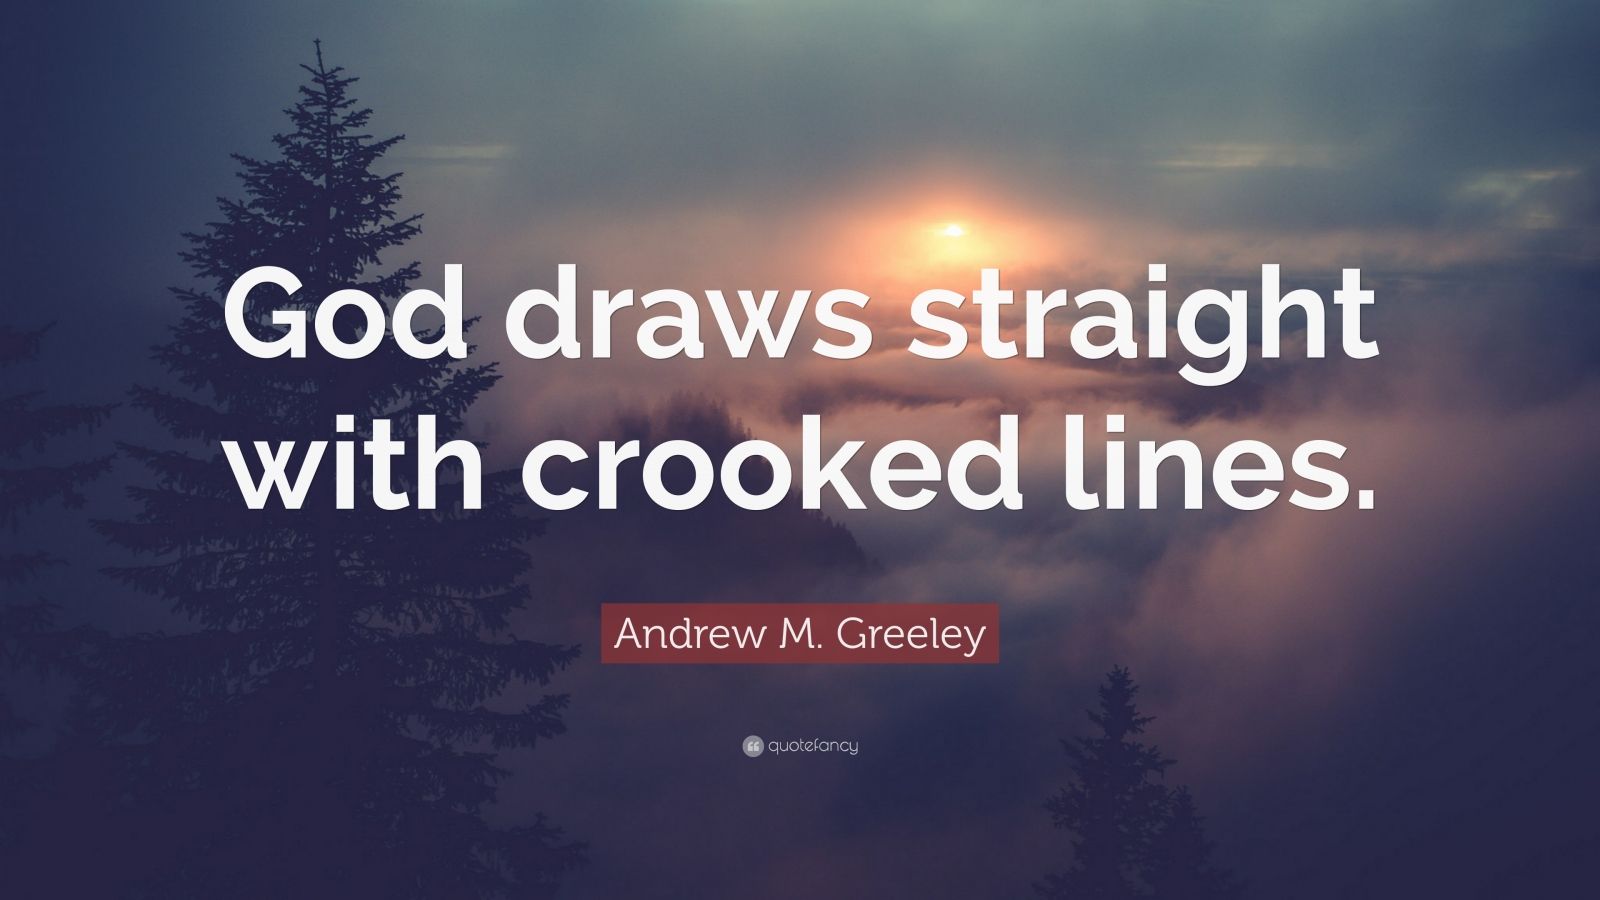 Andrew M. Greeley Quote “God draws straight with crooked lines.” (7